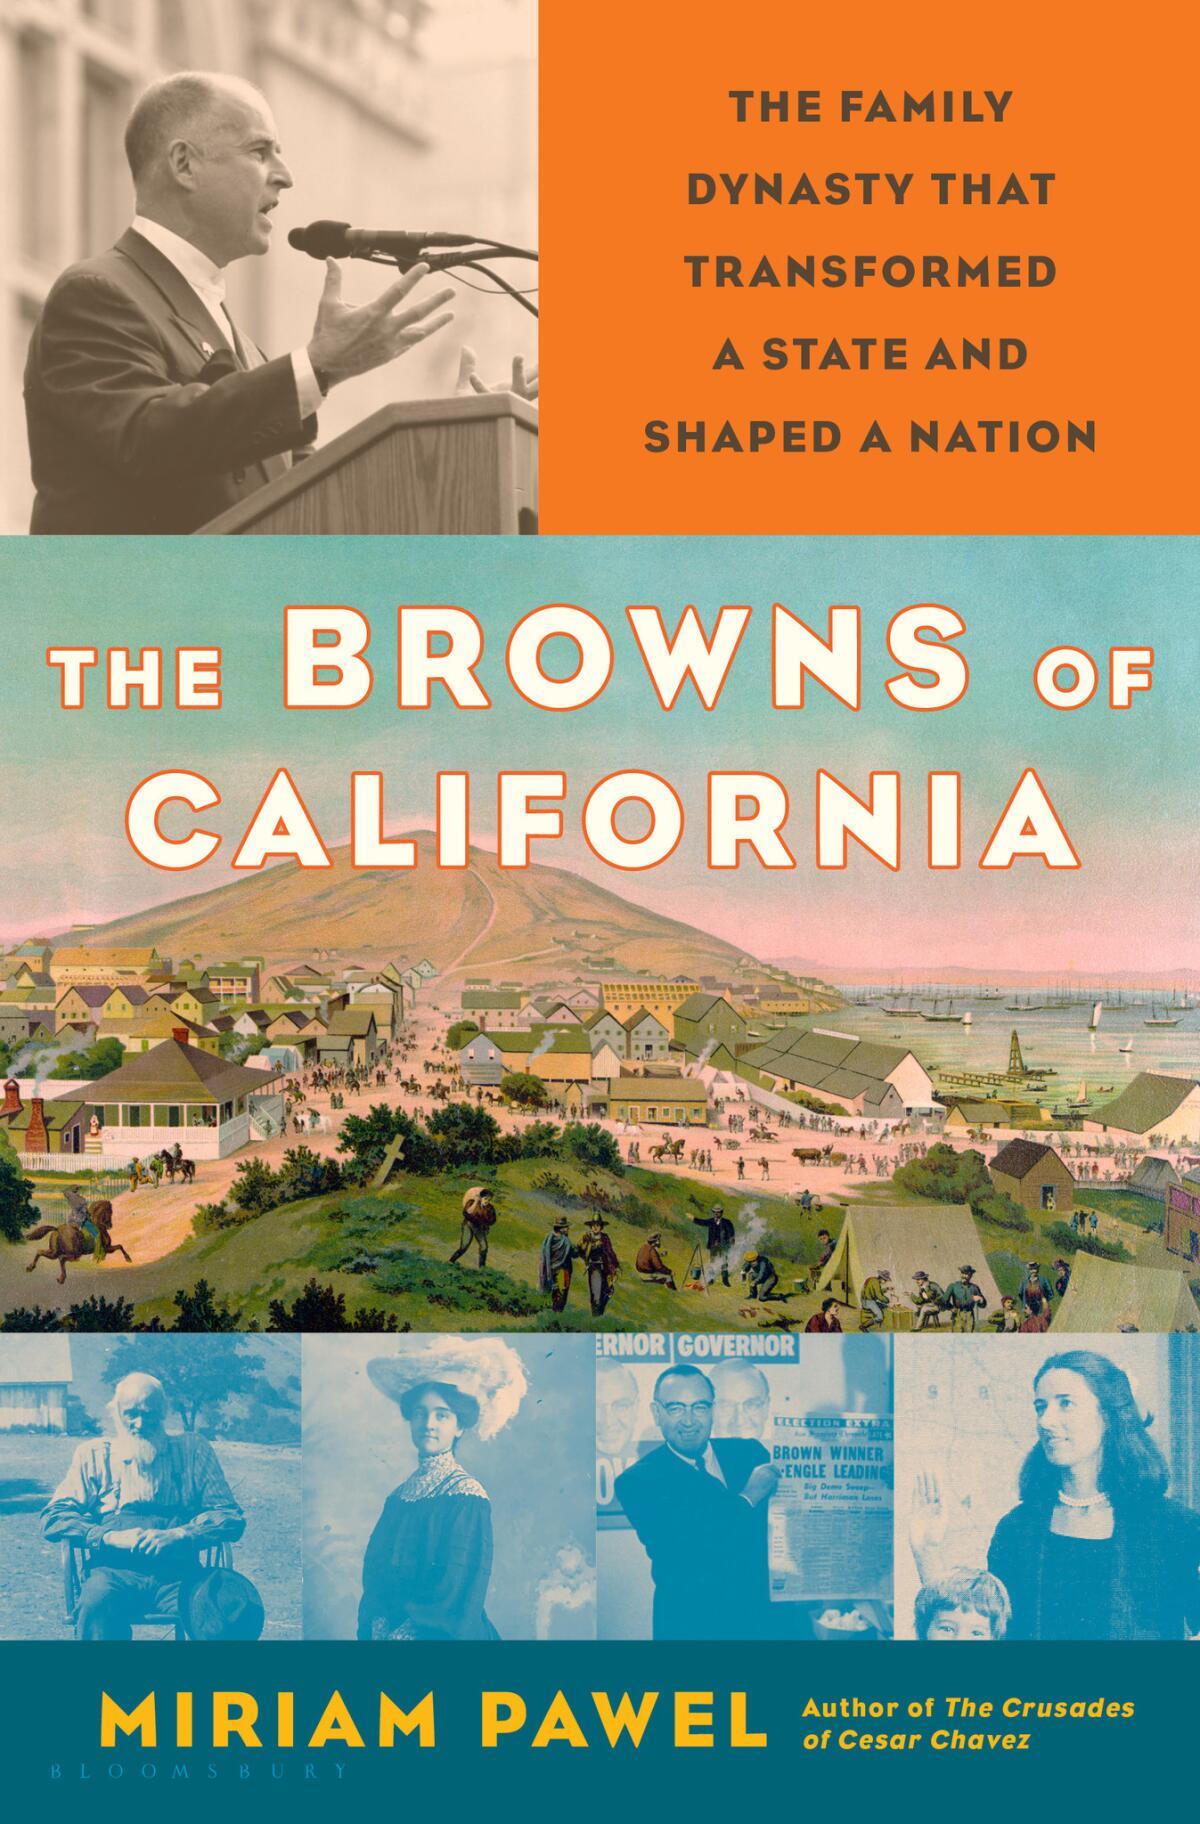 'The Browns of California' by Miriam Pawell